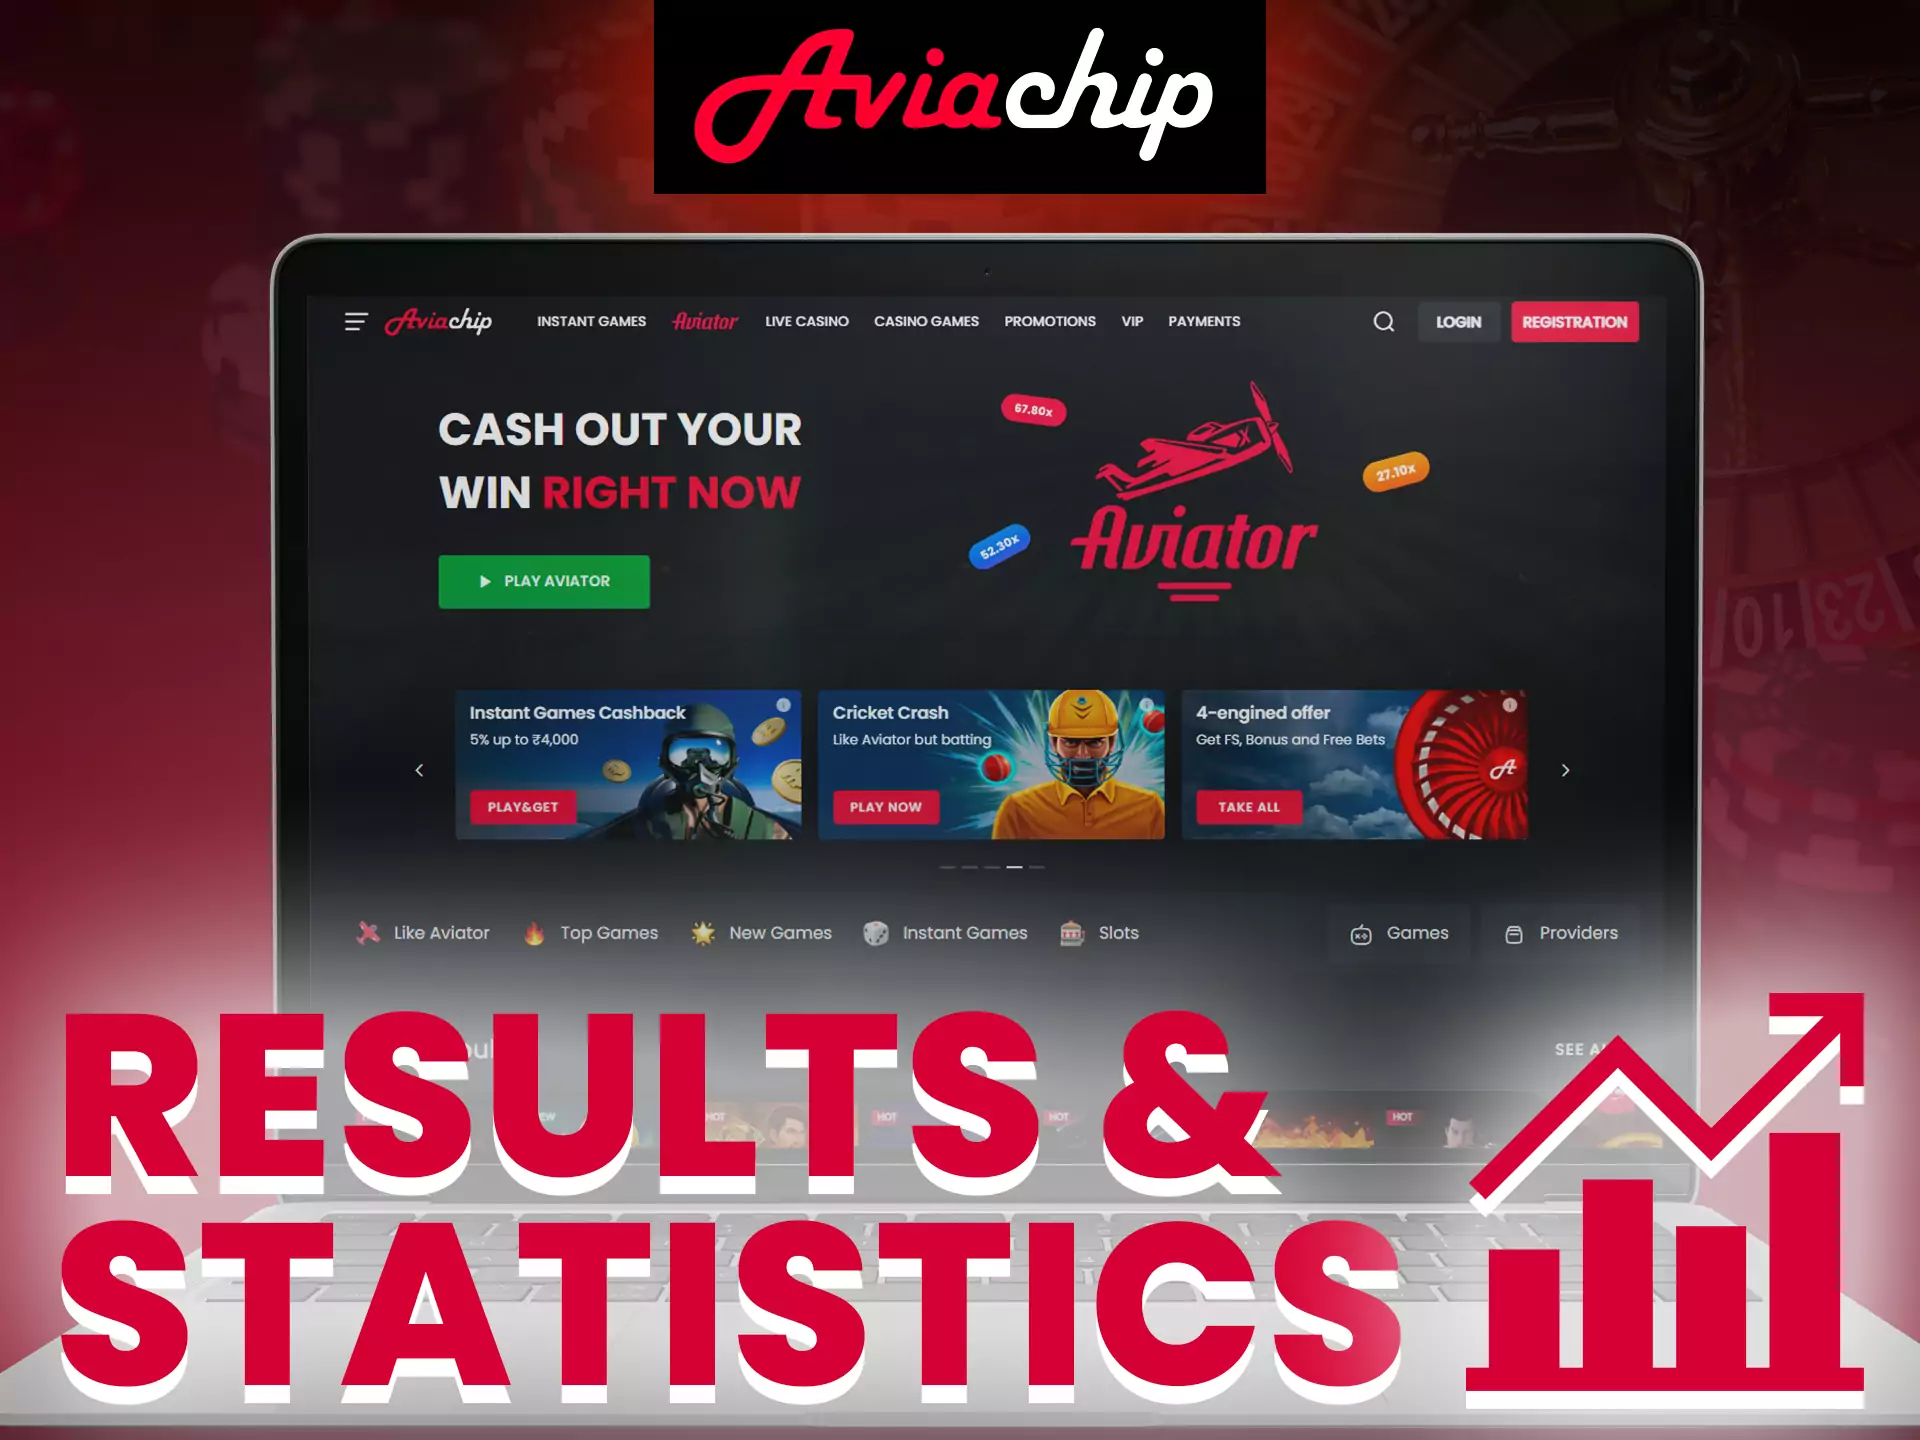 Aviachip provides you with statistics and match results for better predictions.